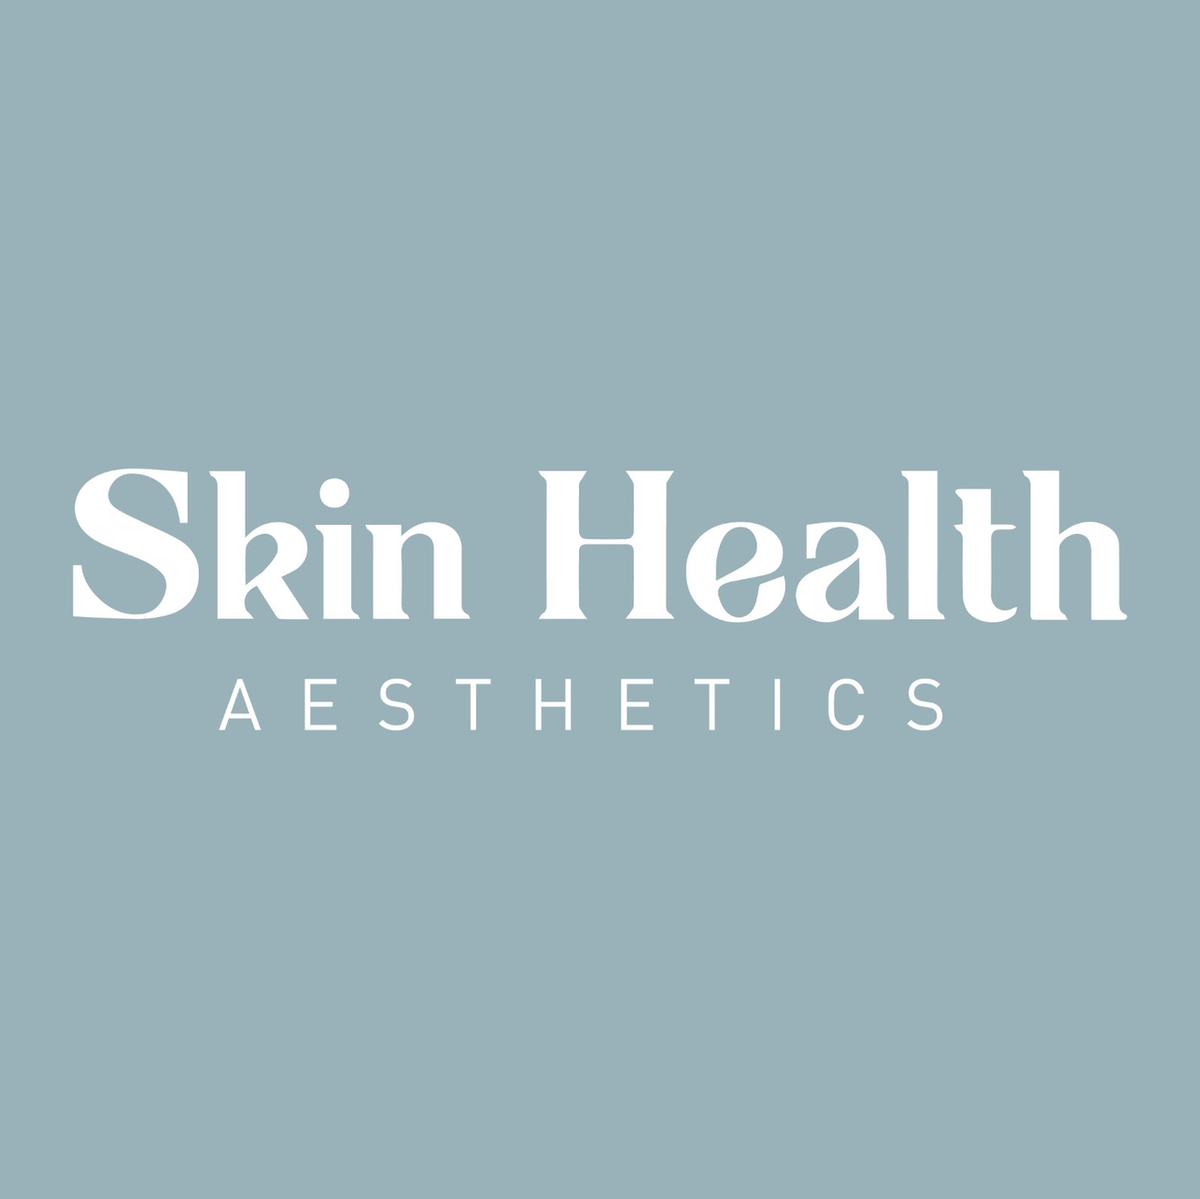 Skin Health's images